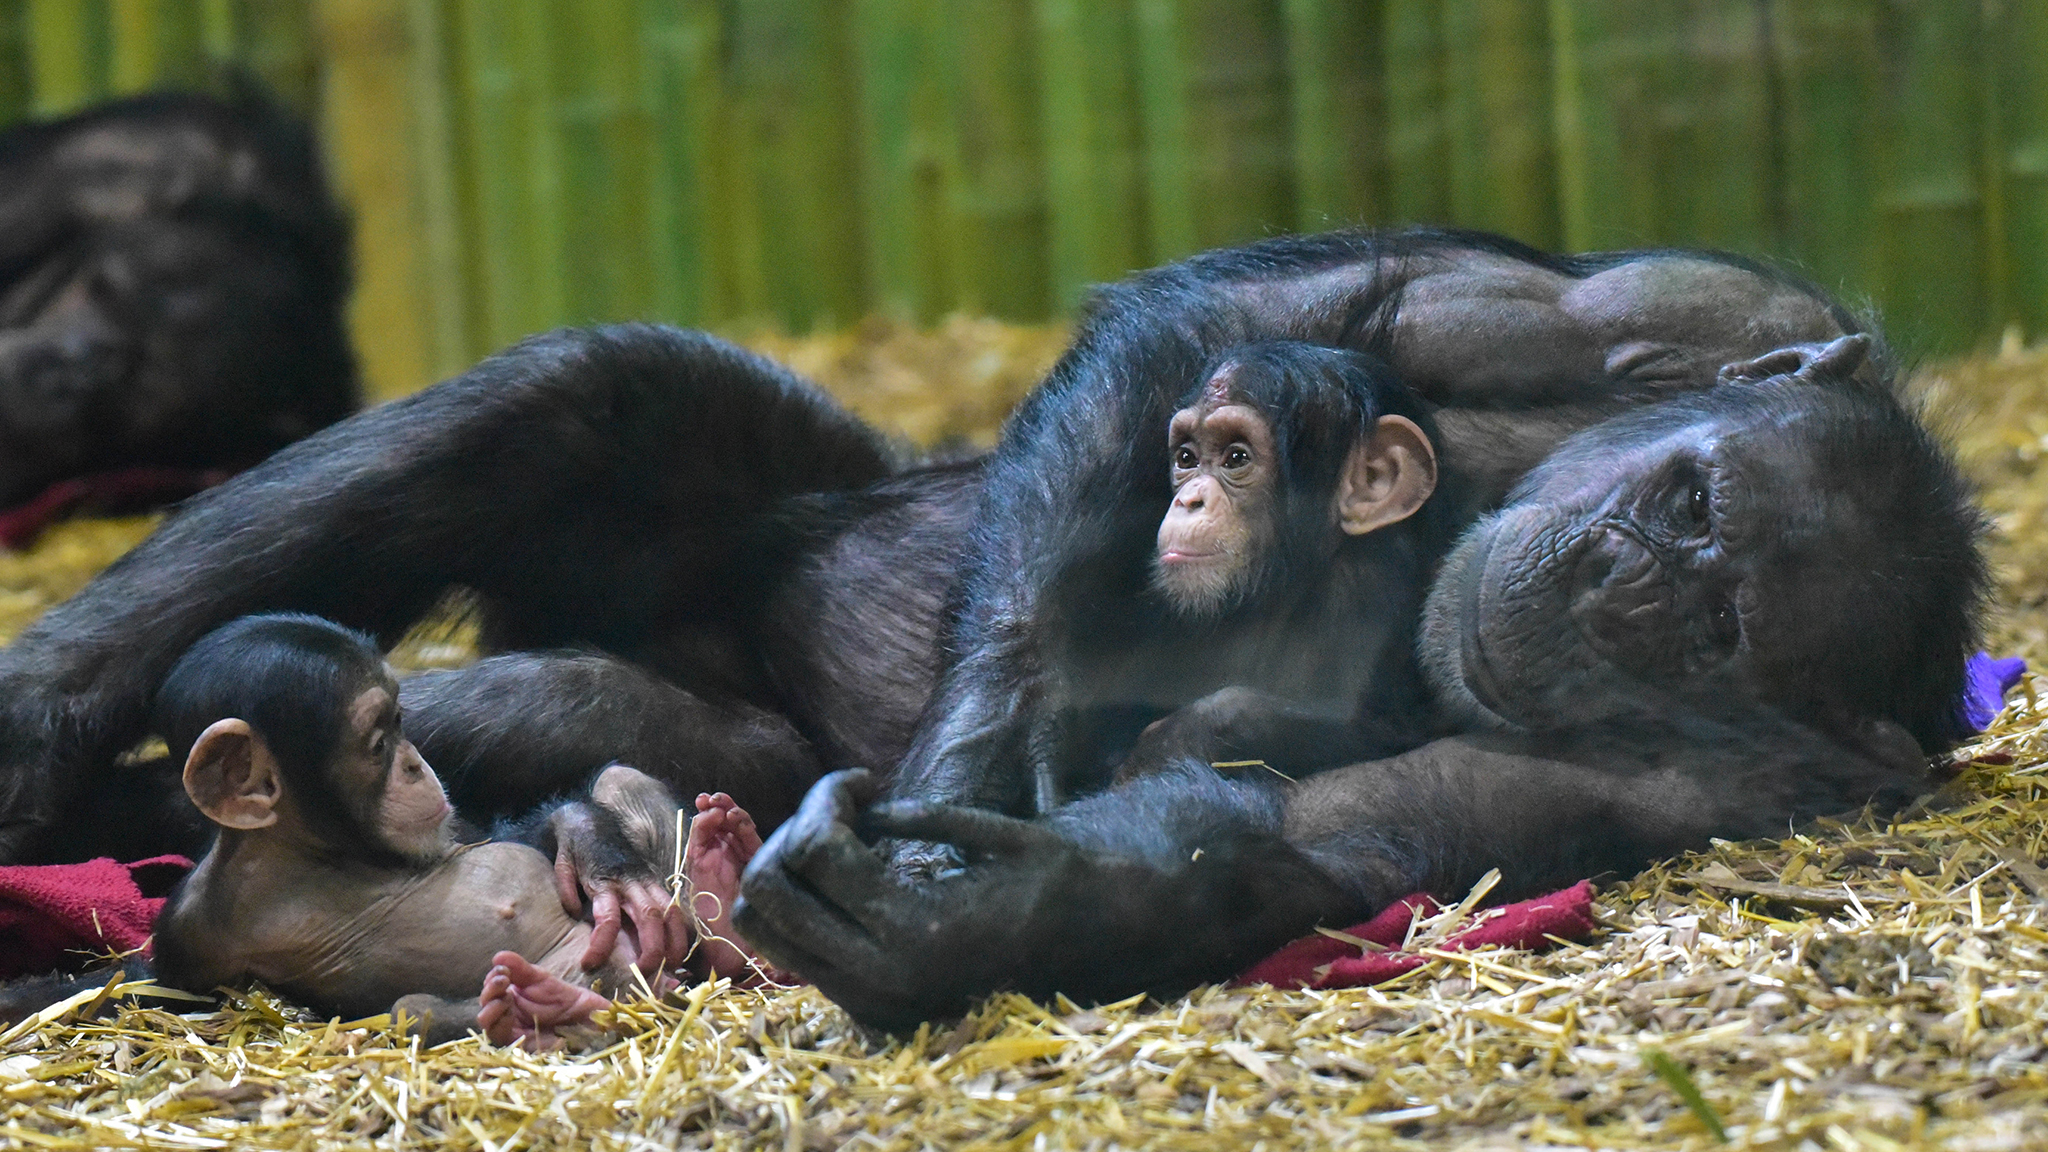 Chimpanzee with two babies.